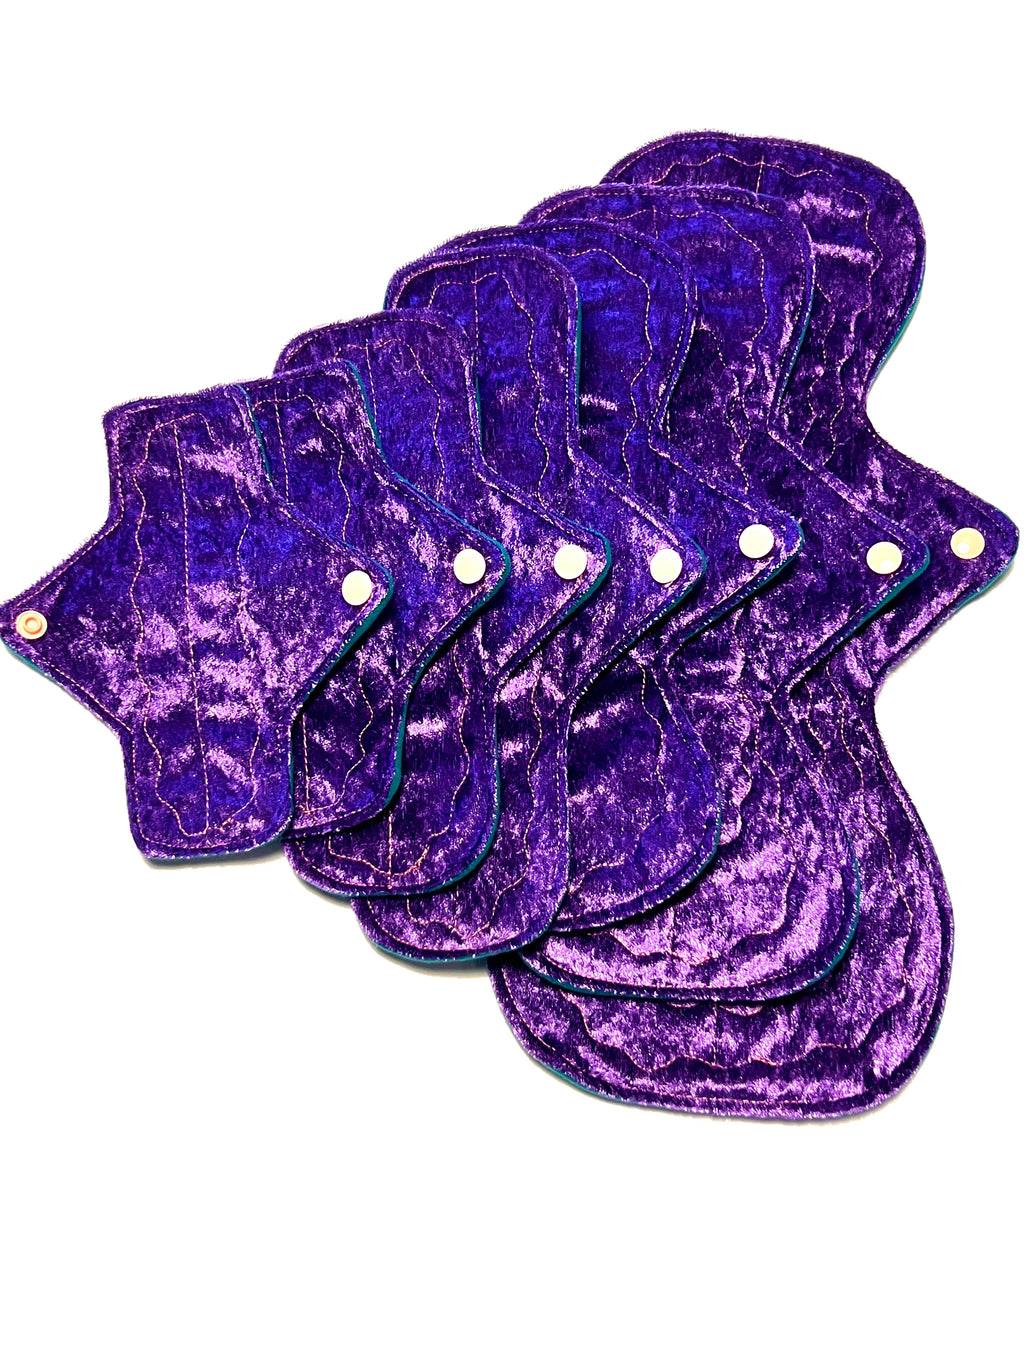 LIMITED EDITION "We Love the 90's!" Signature Luxury Crushed Velvet Reusable Cloth Pads